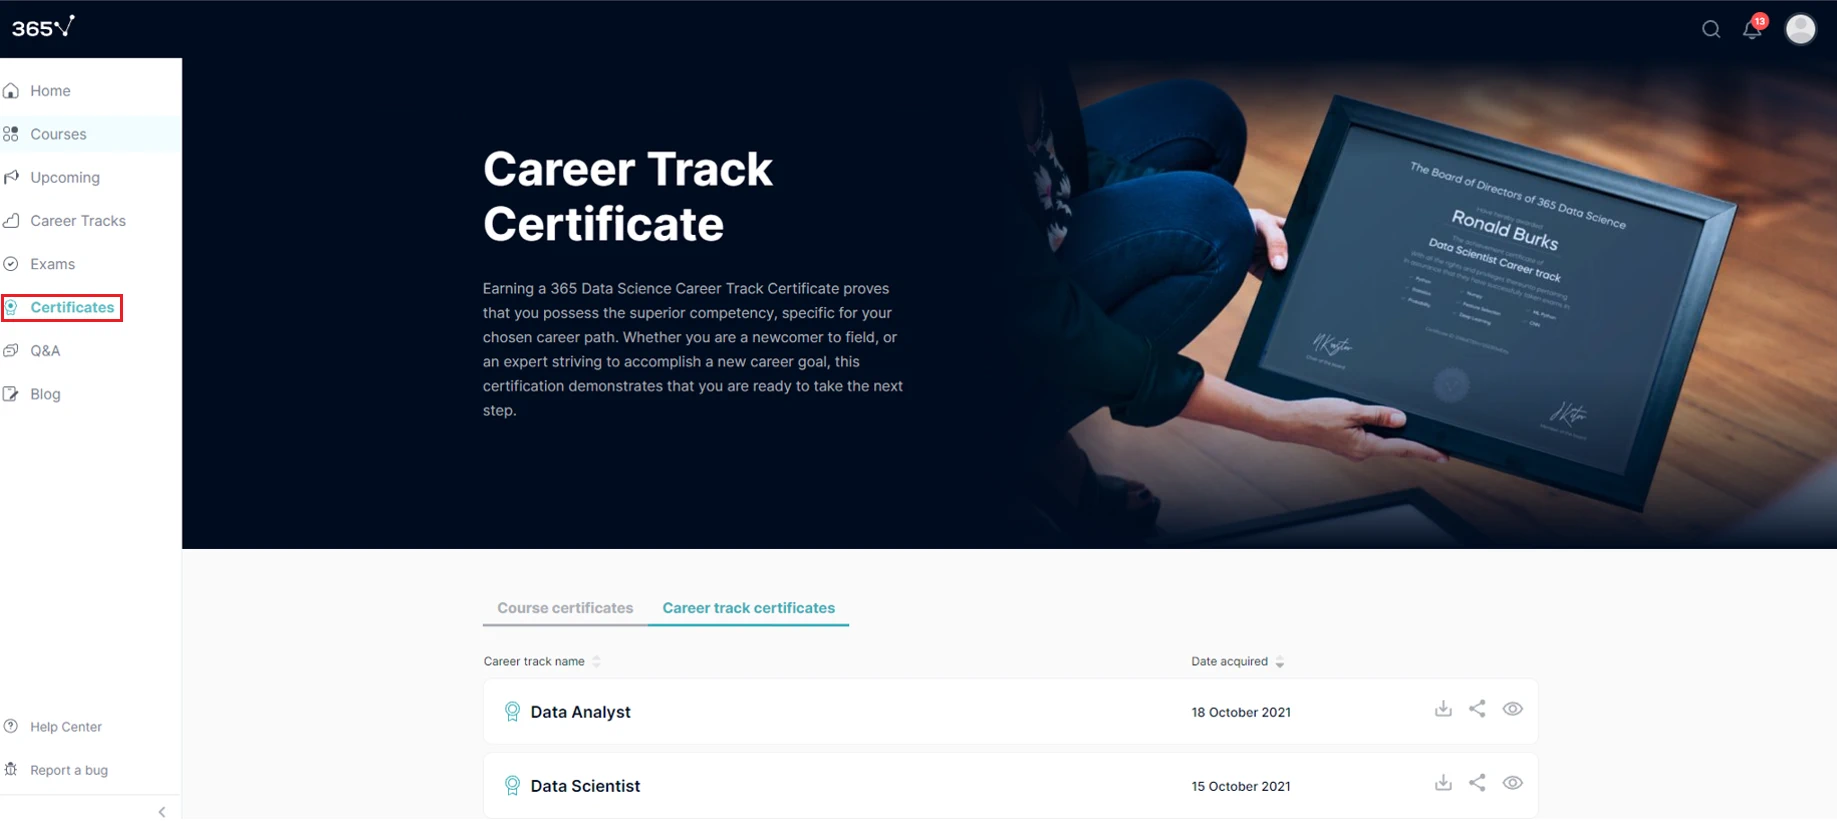 How can I get a career track certificate